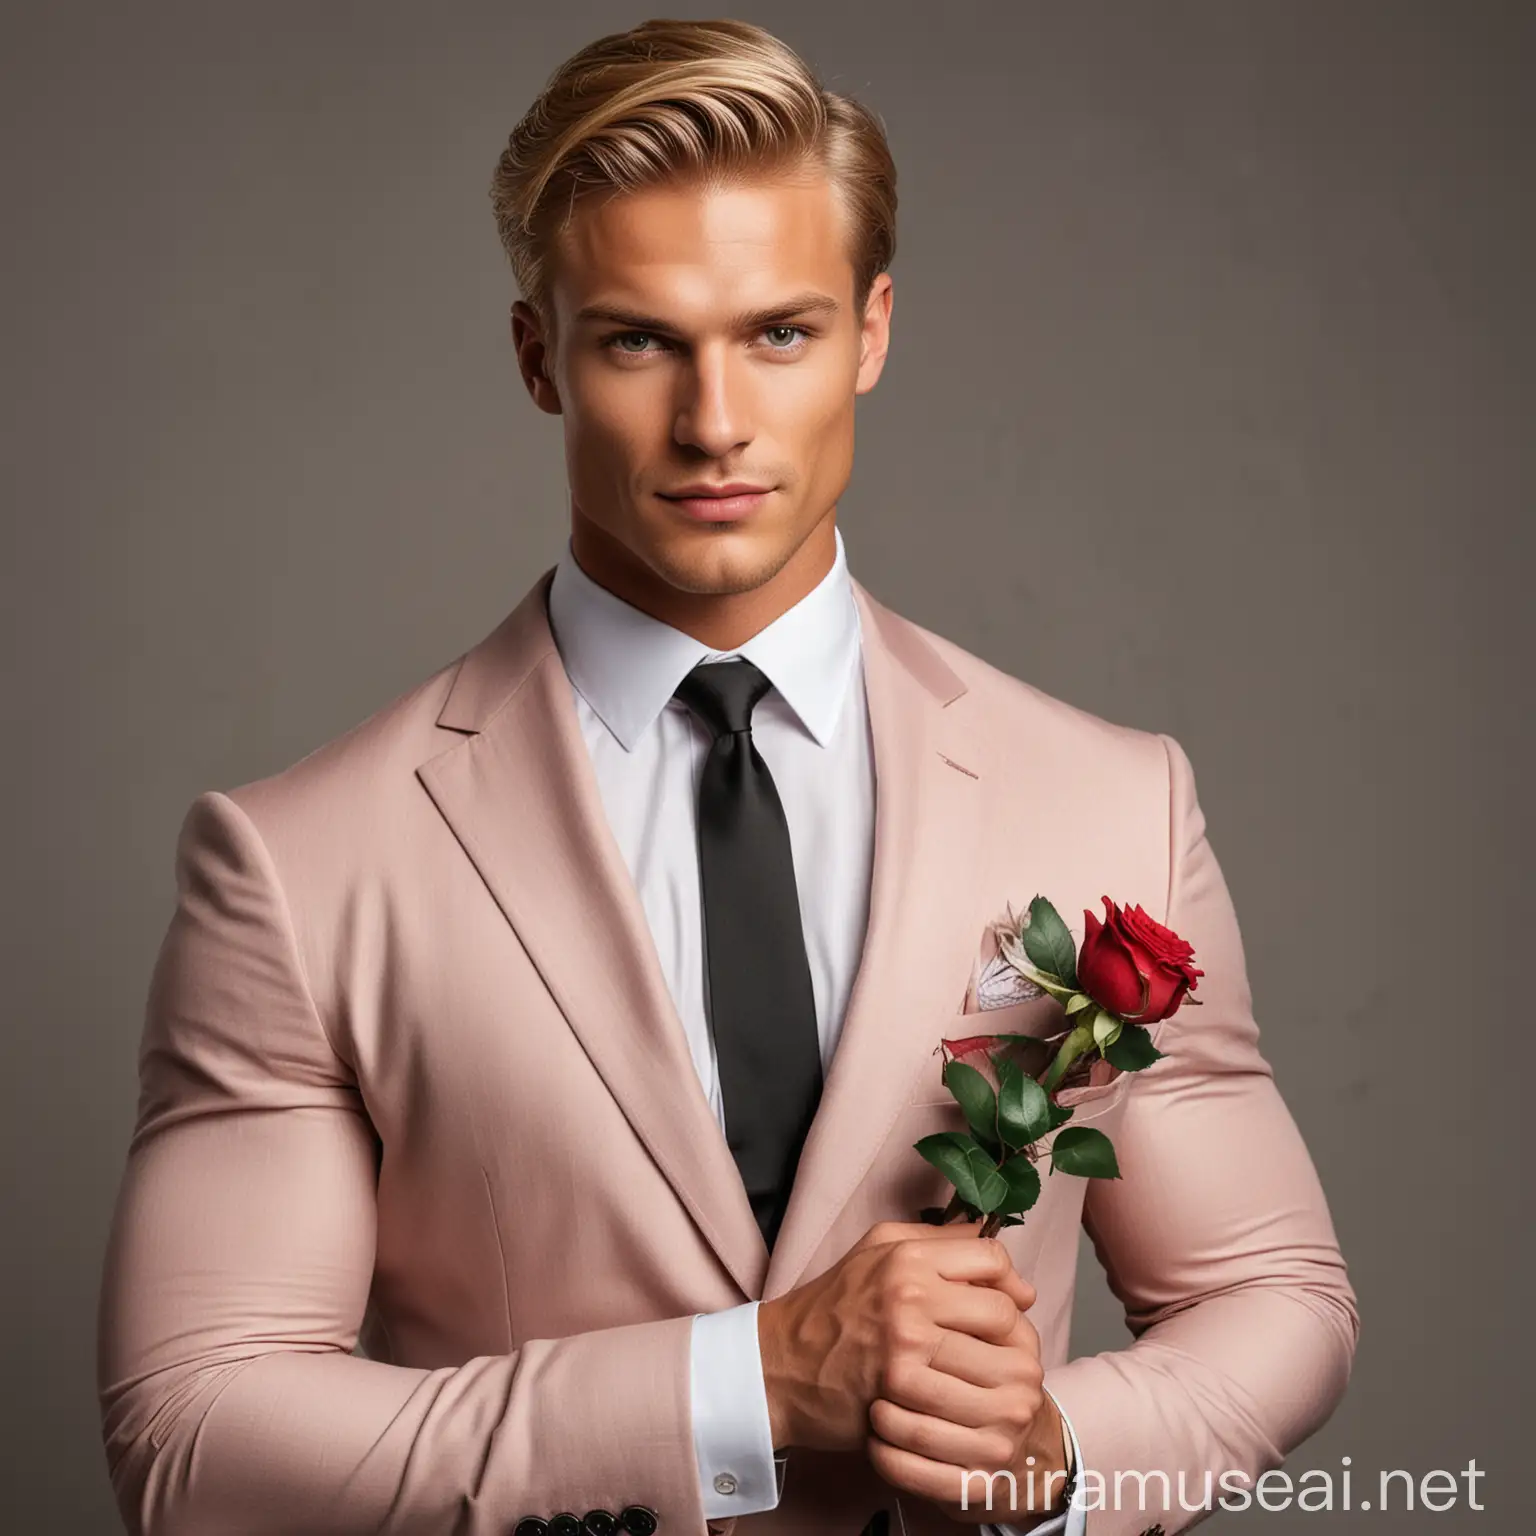 Stylish Blond Man in Suit Holding a Rose